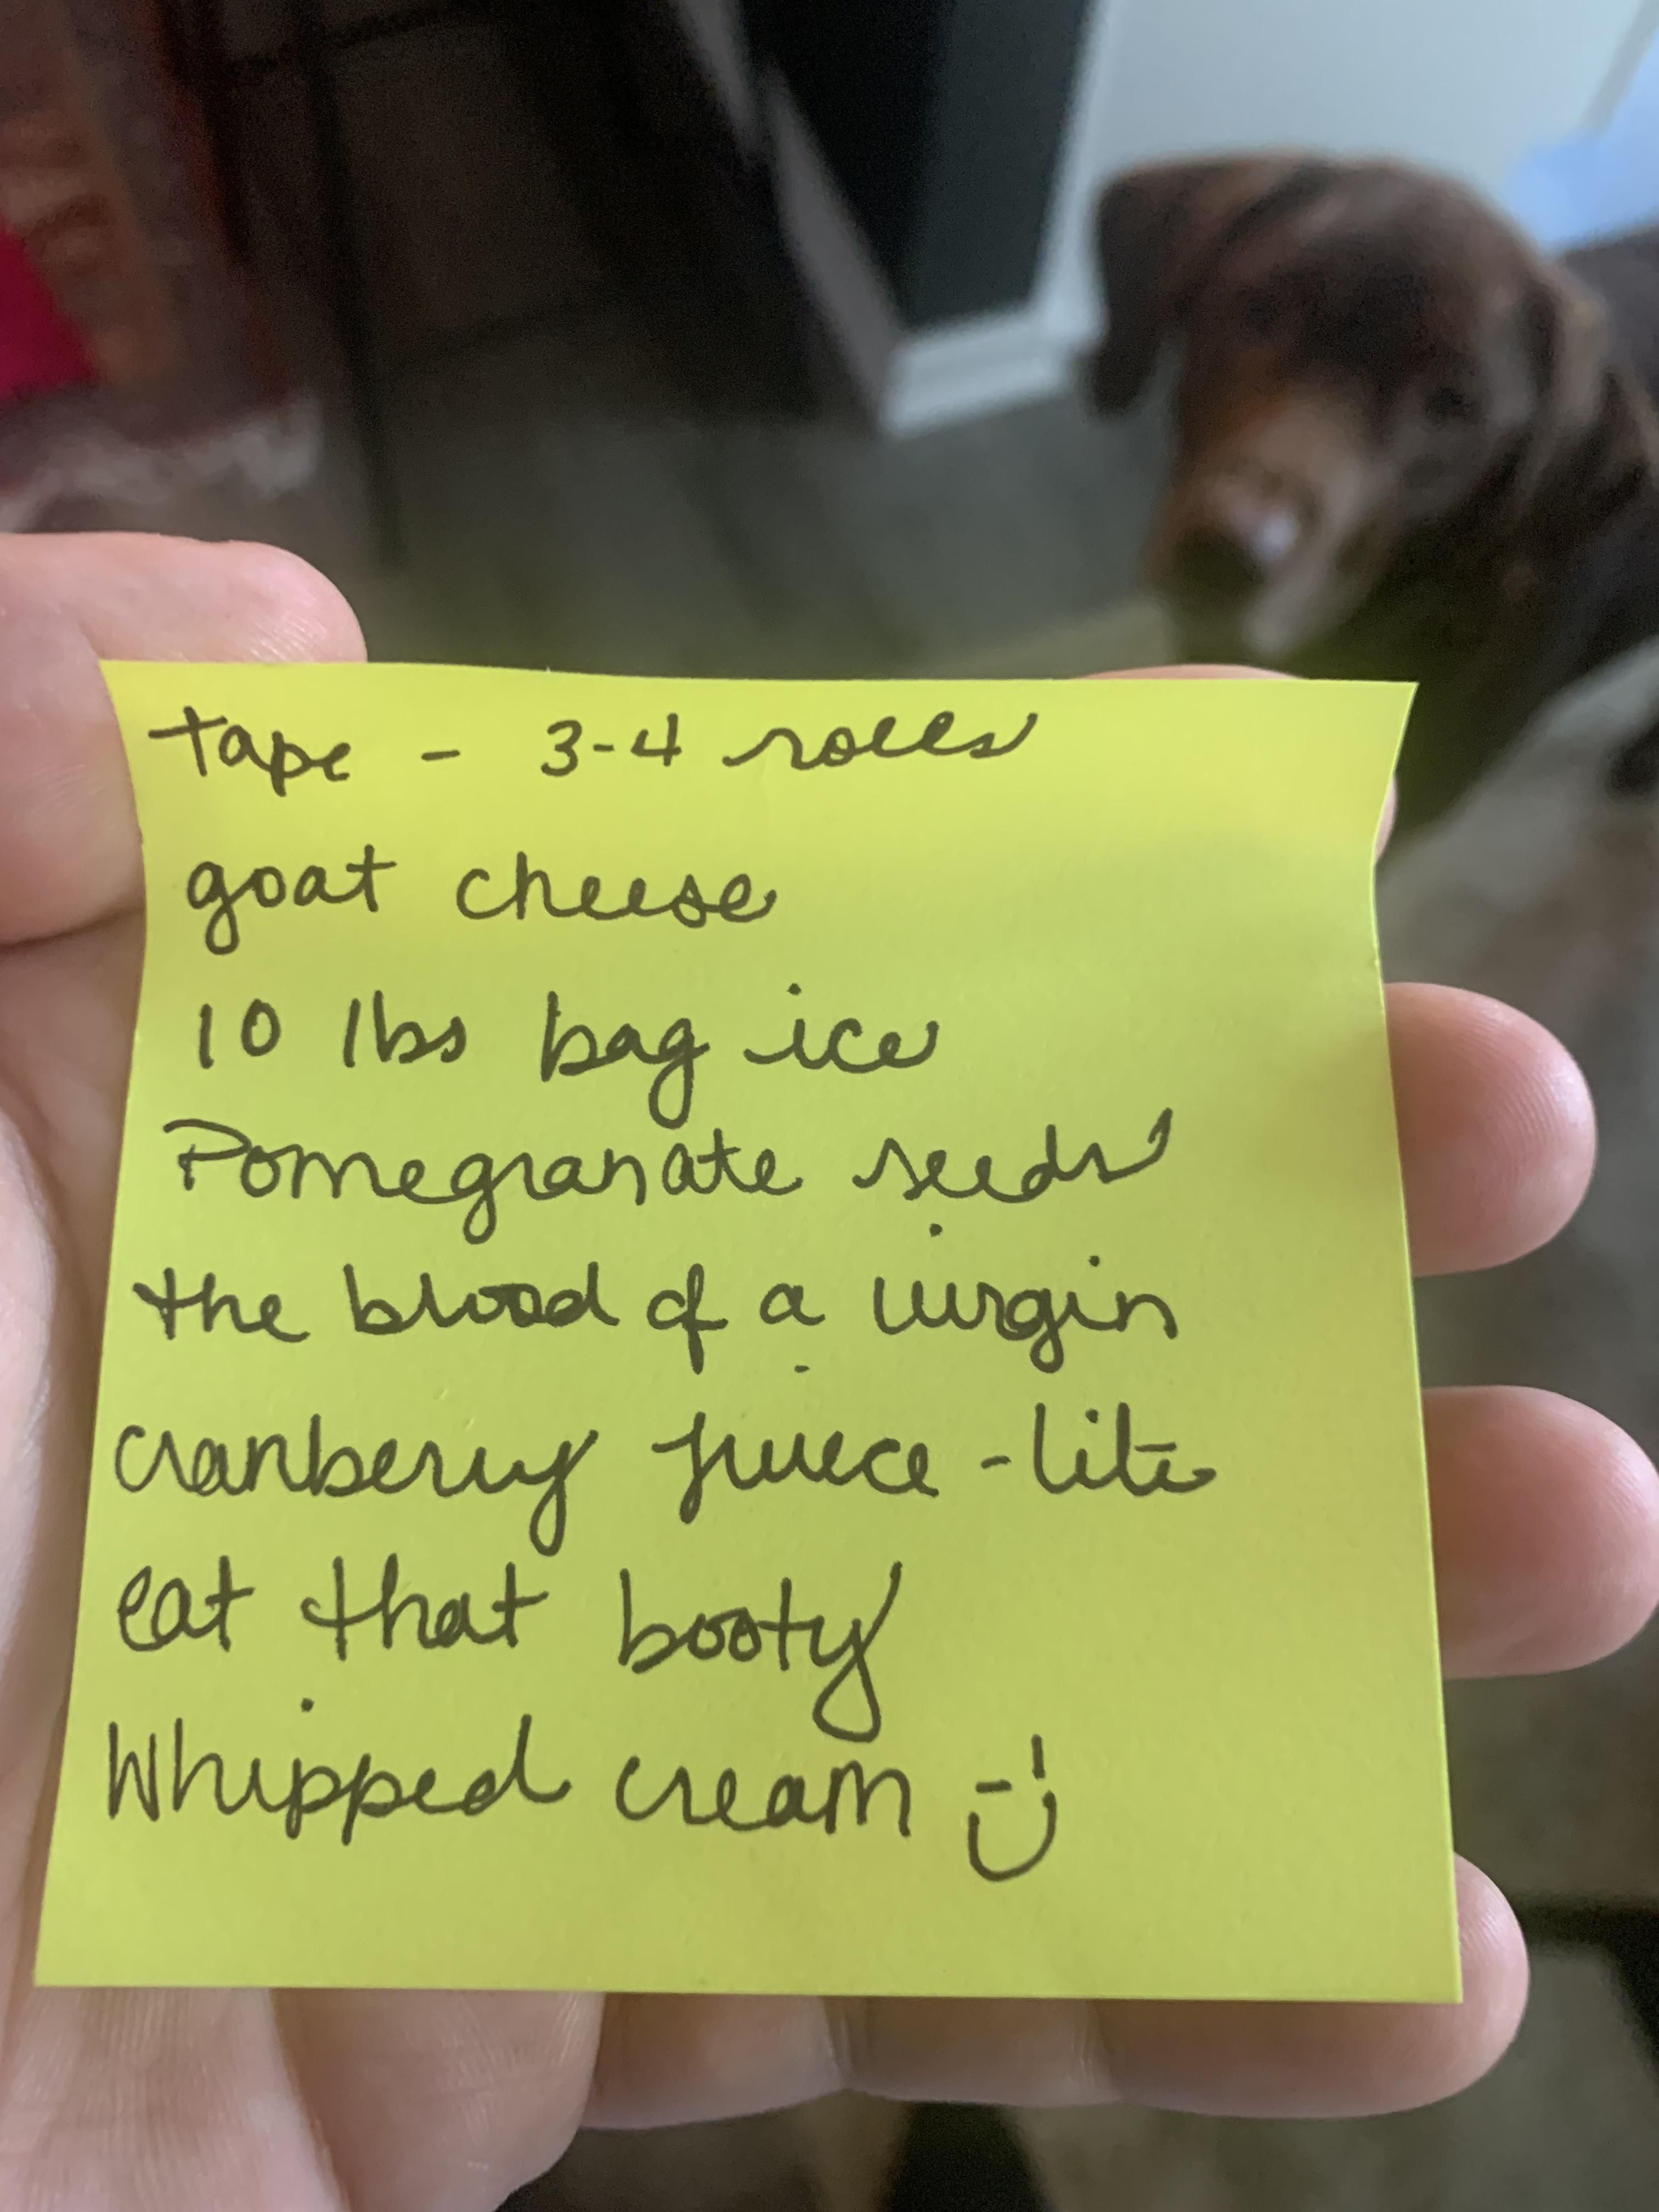 My last minute thanksgiving shopping list from my wife